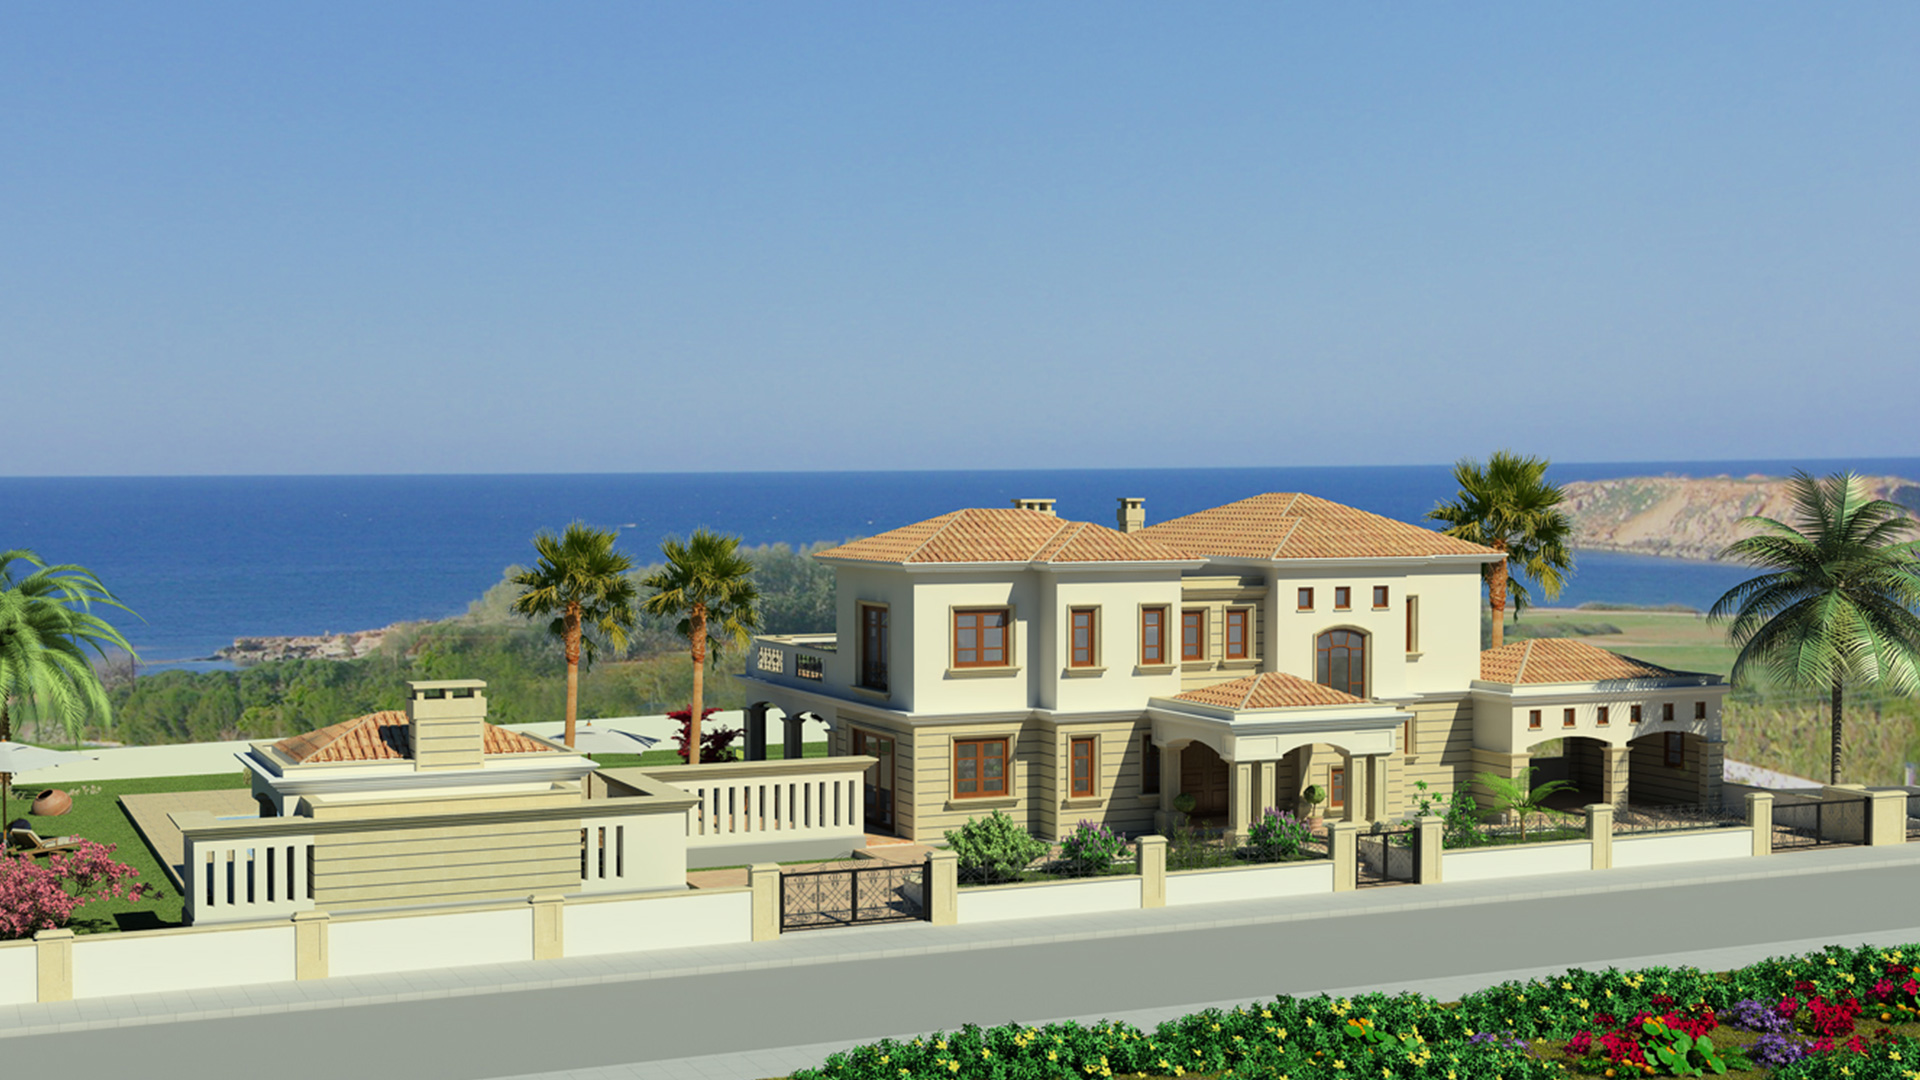 Residential house by the sea from natavel developments